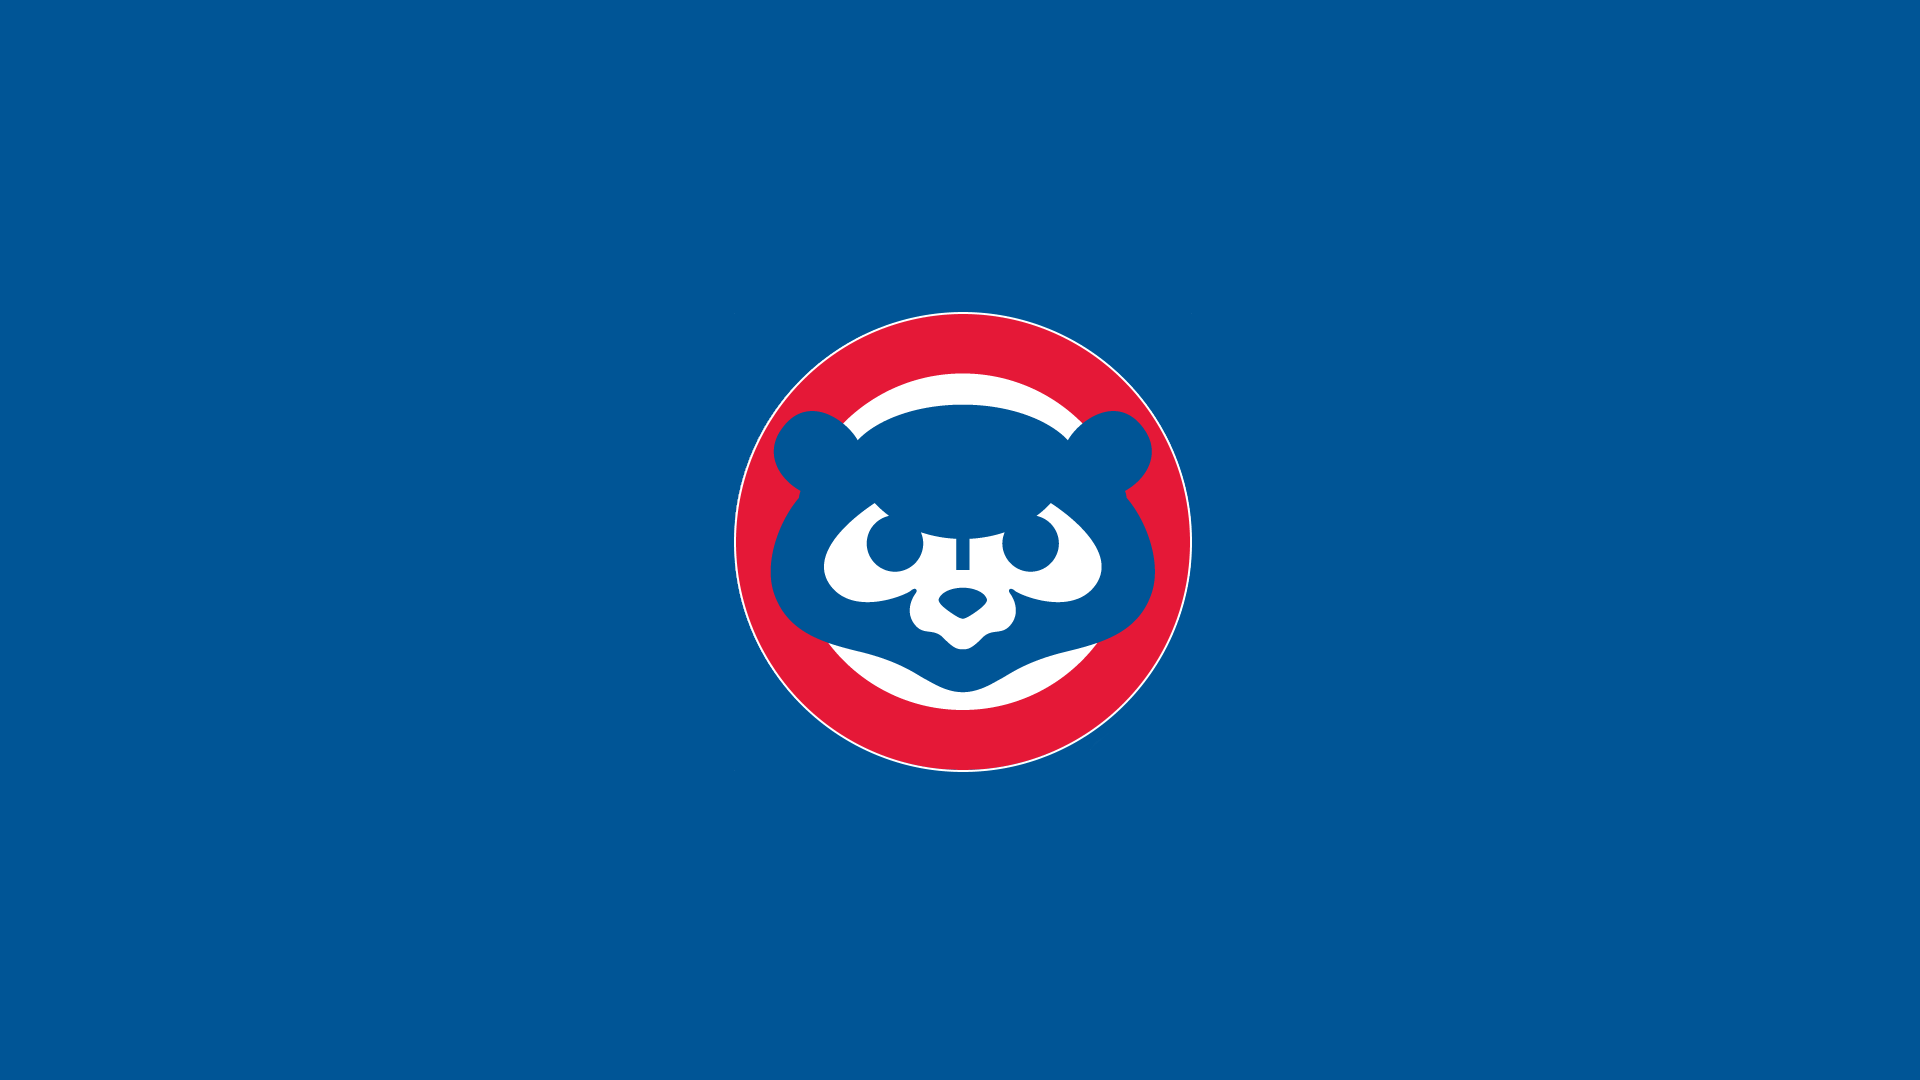 Cubs Wallpapers Group (61+)